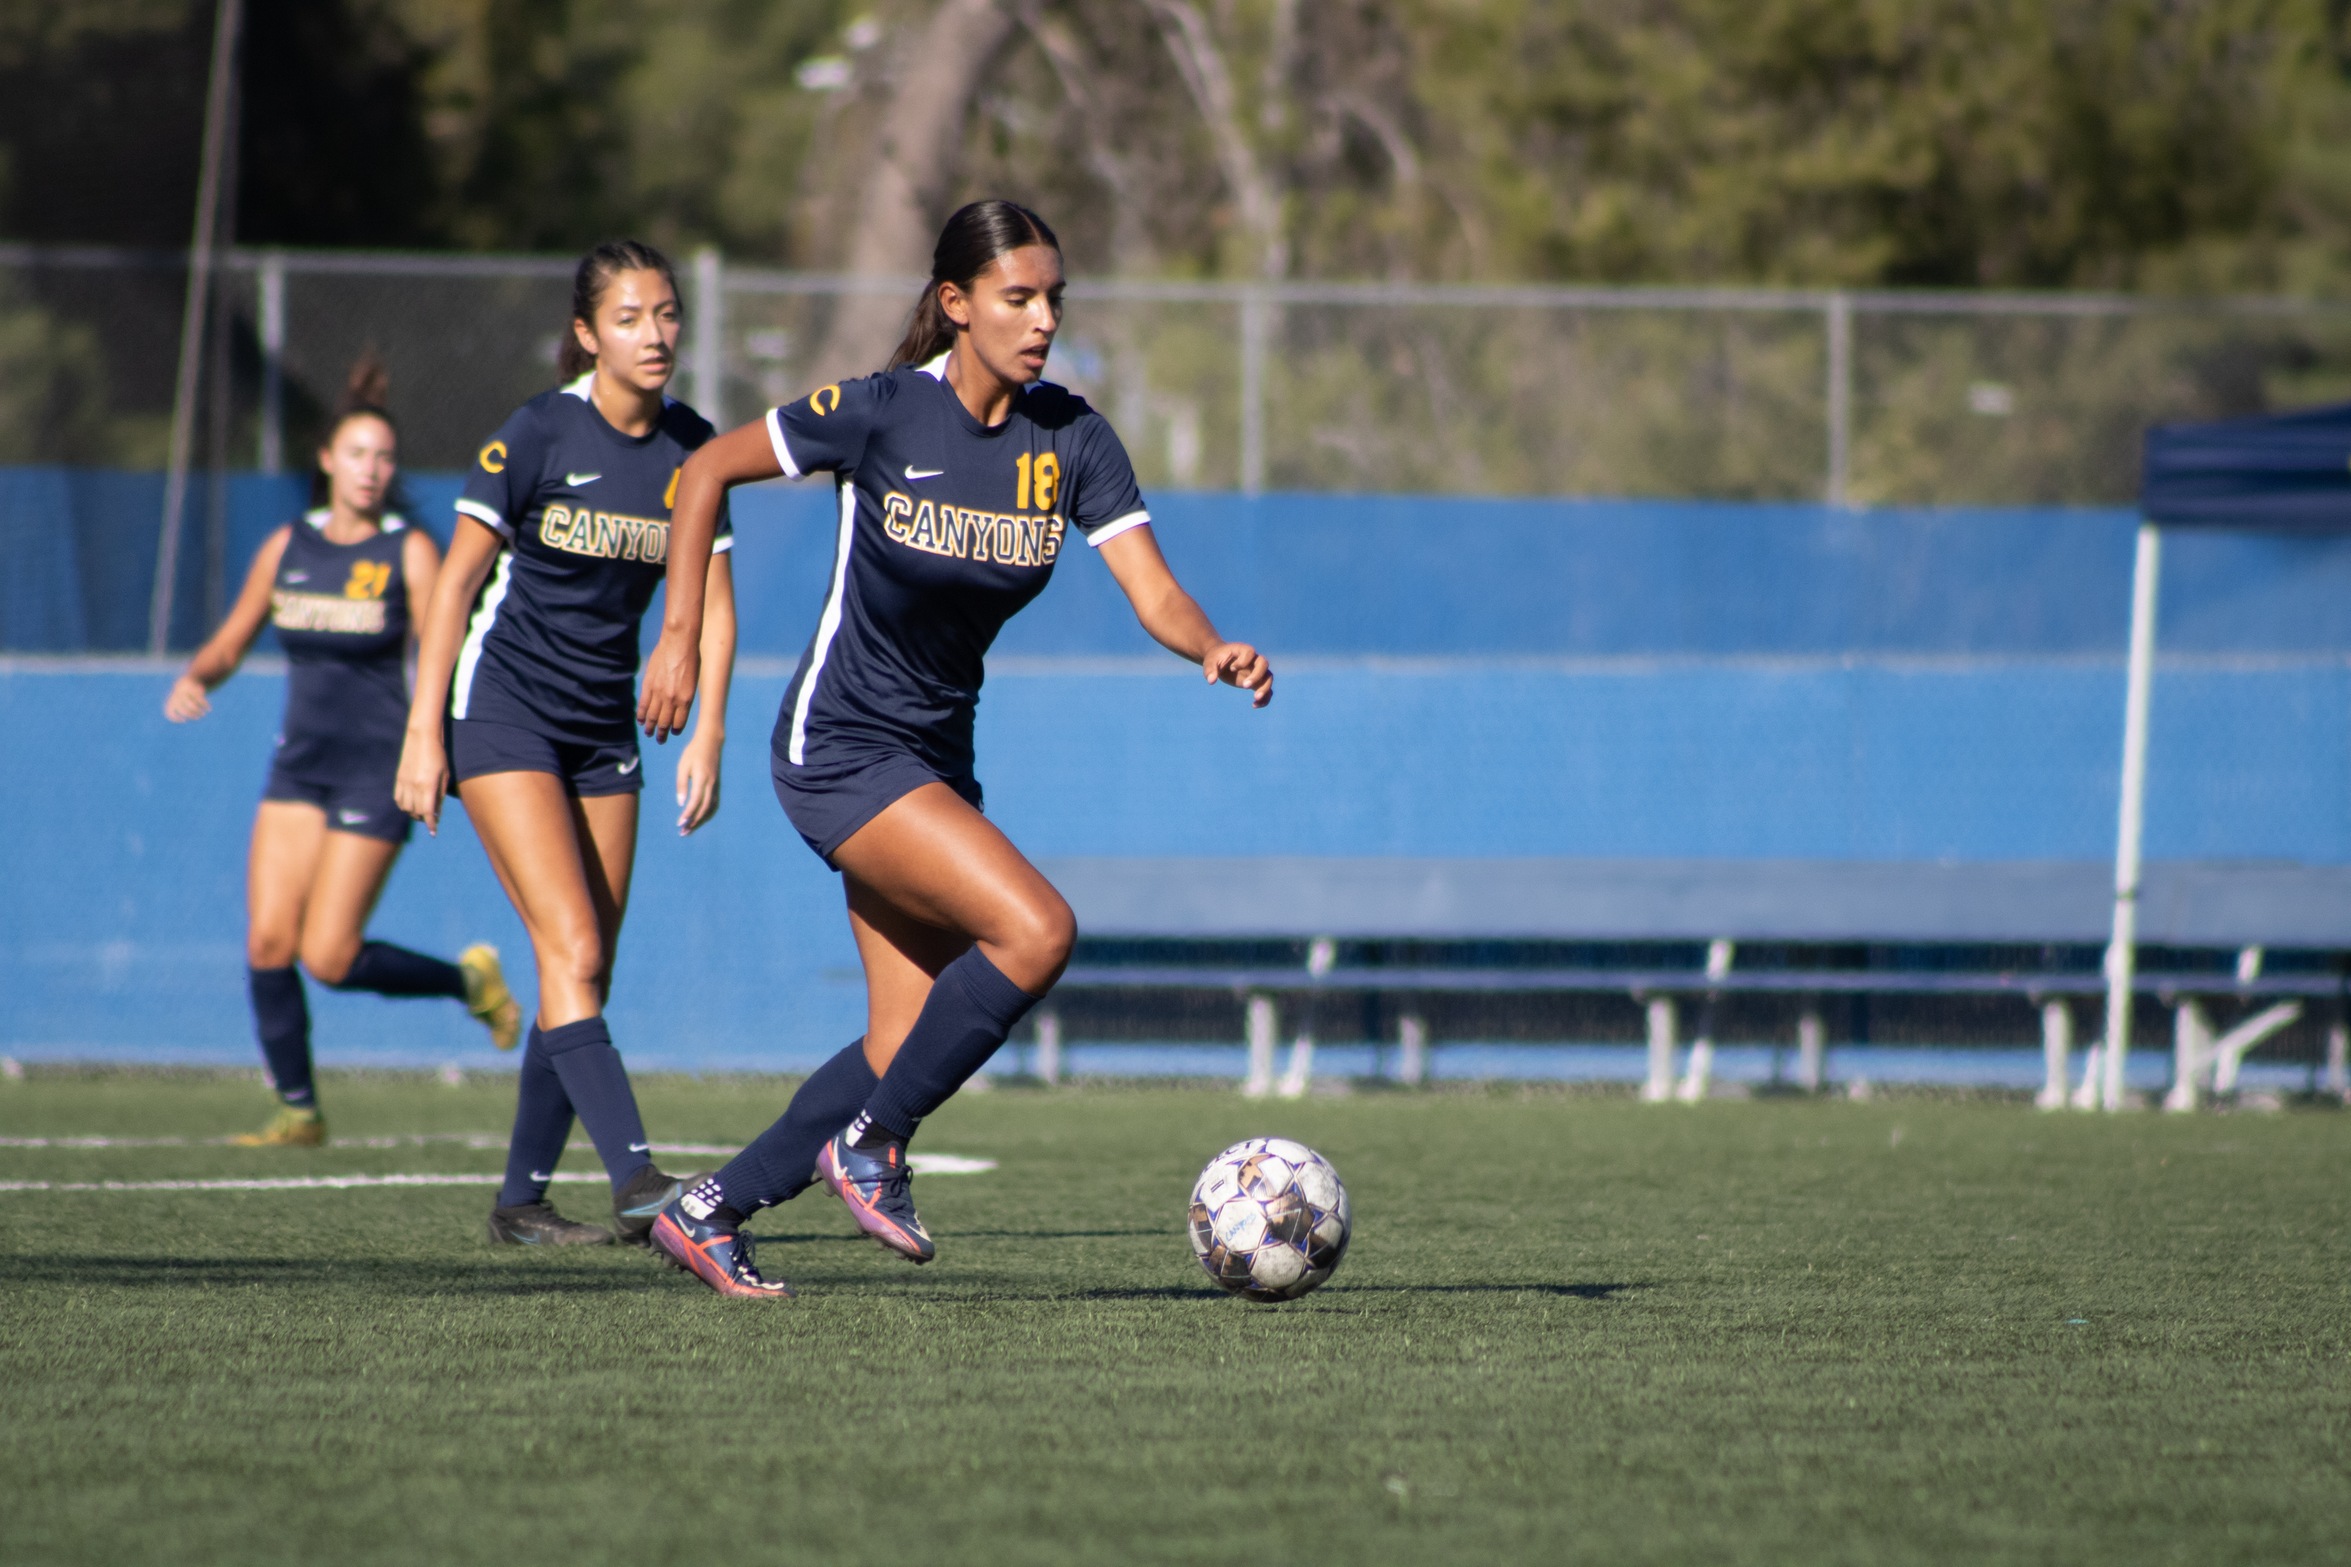 College of the Canyons women's soccer stock action image.